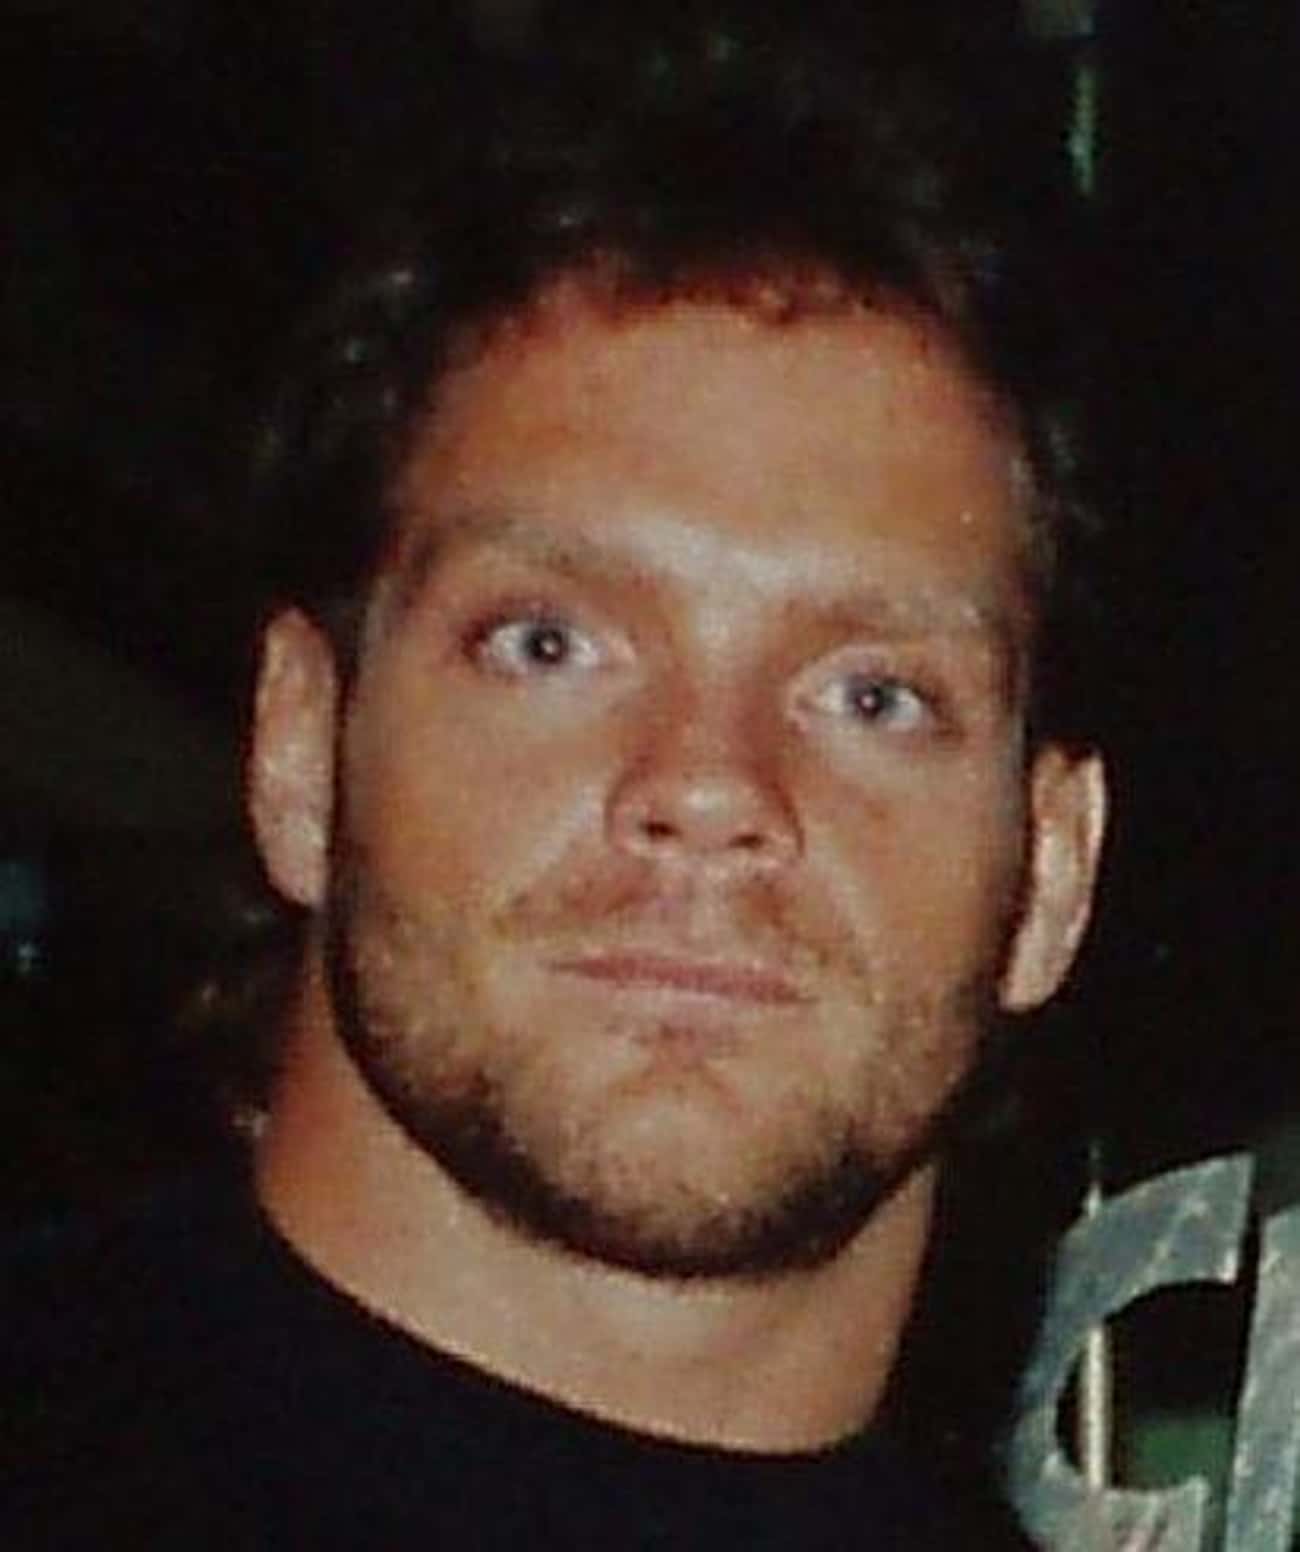 Benoit's Wife Wanted Him To Quit Wrestling The Same Year The Tragedy Occurred